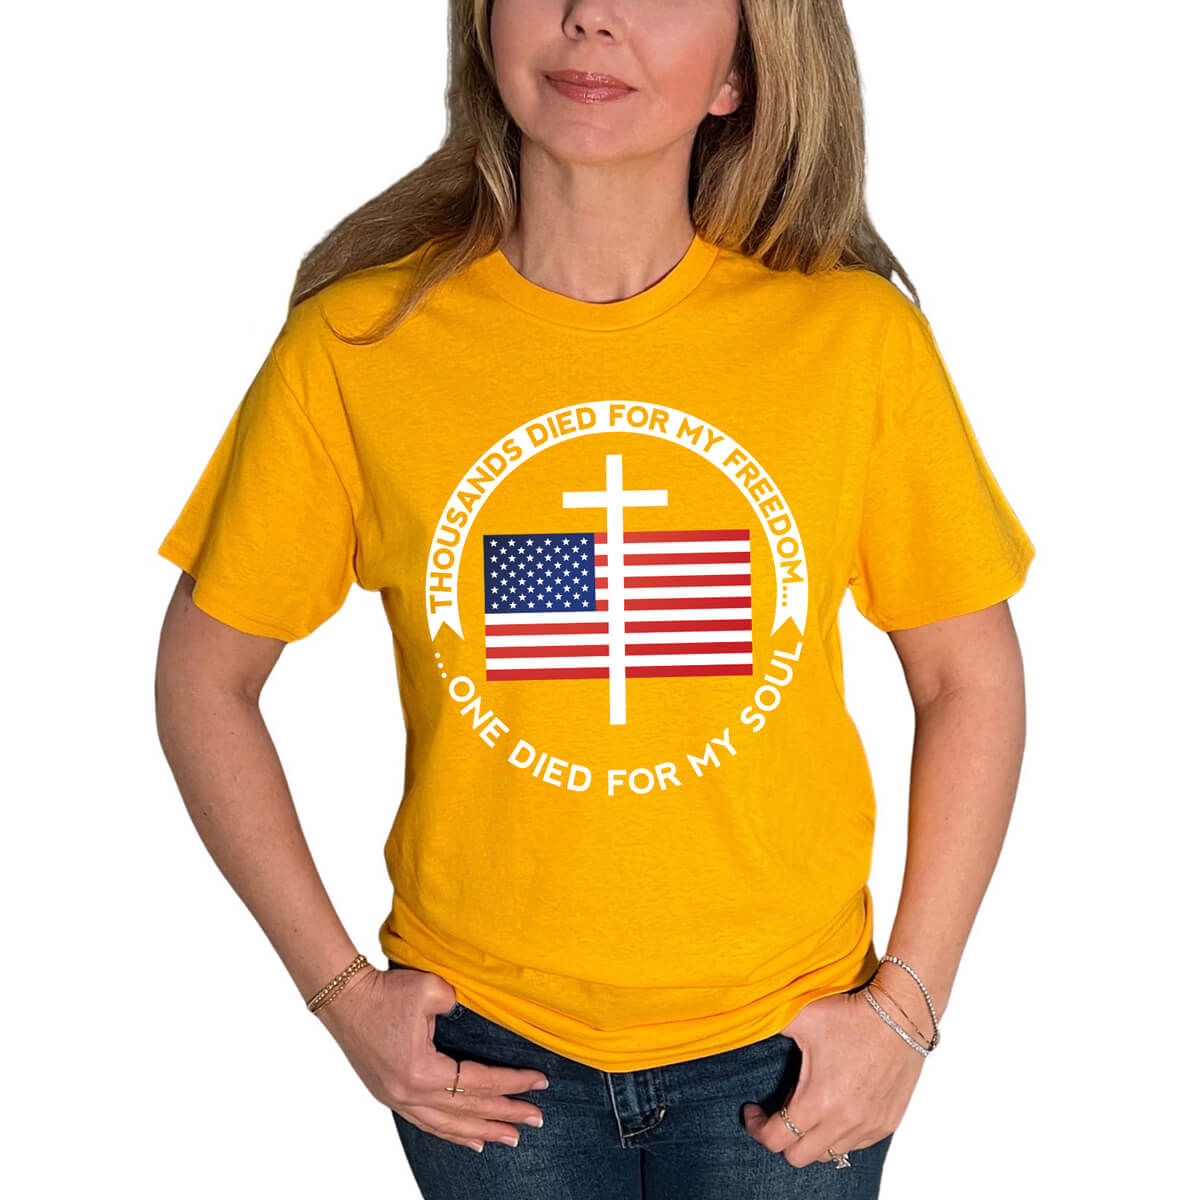 Thousands Died For My Freedom One Died For My Soul T-Shirt